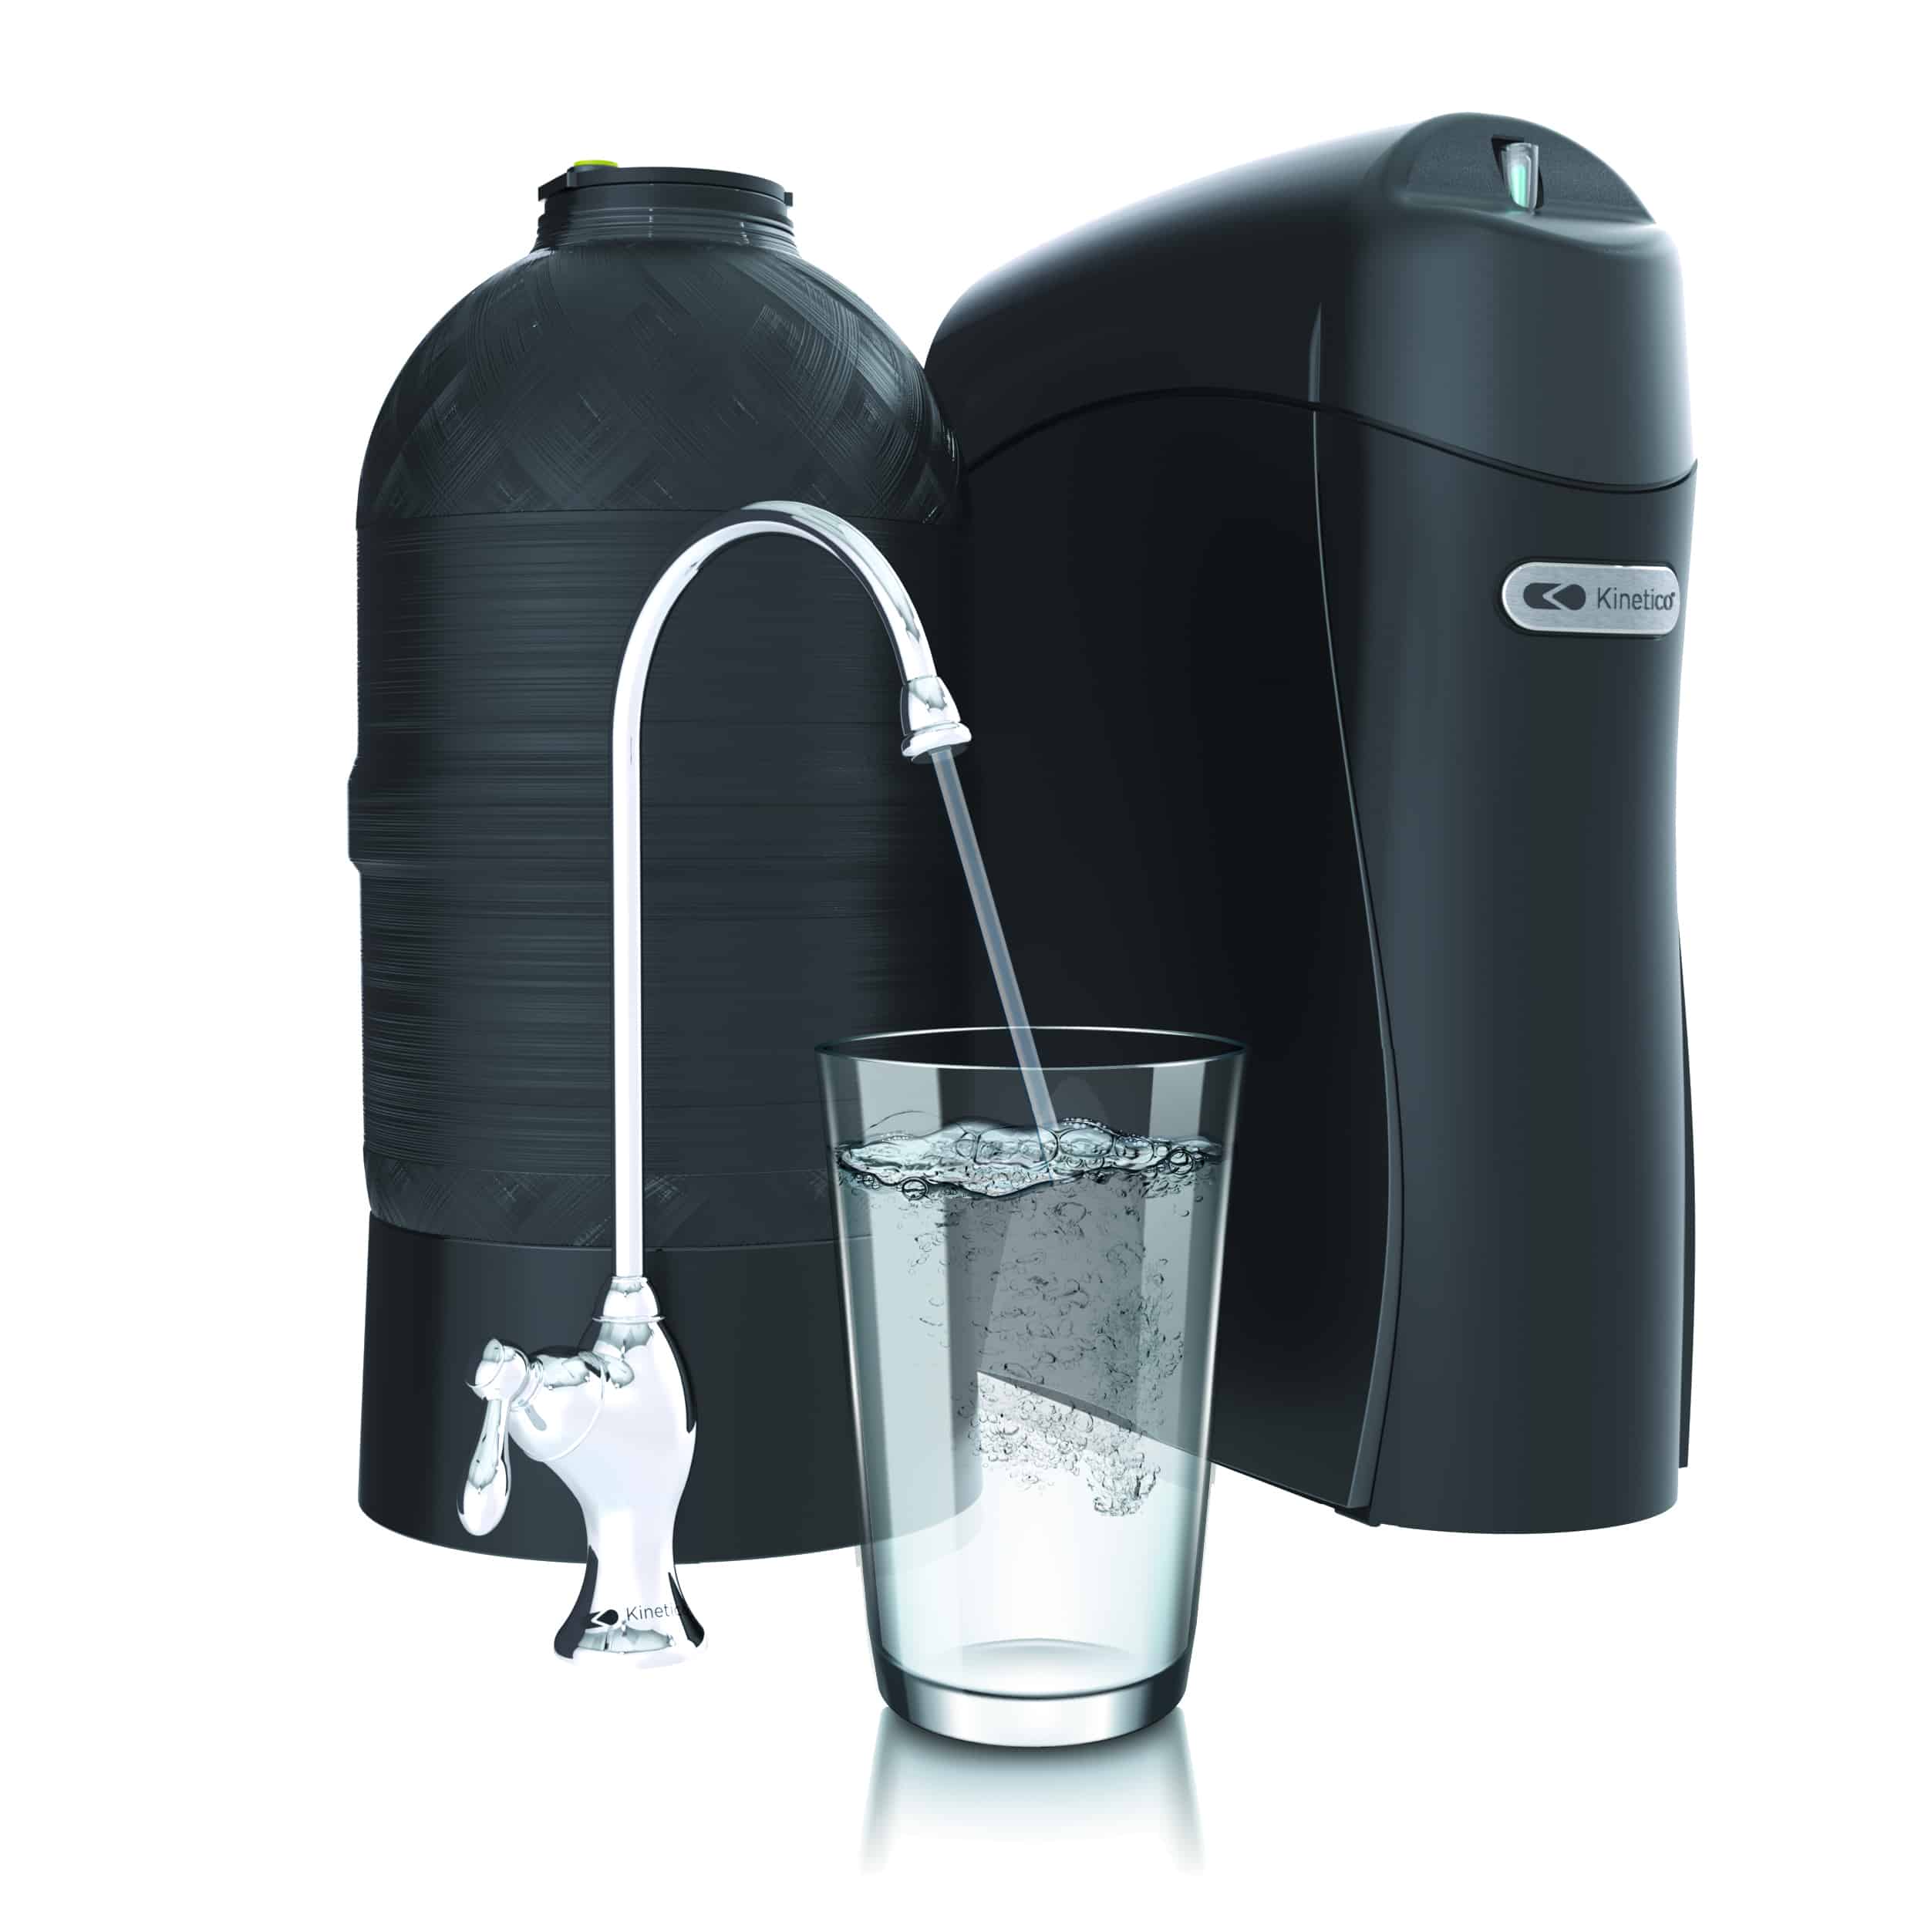 THE KINETICO K5 DRINKING WATER STATION